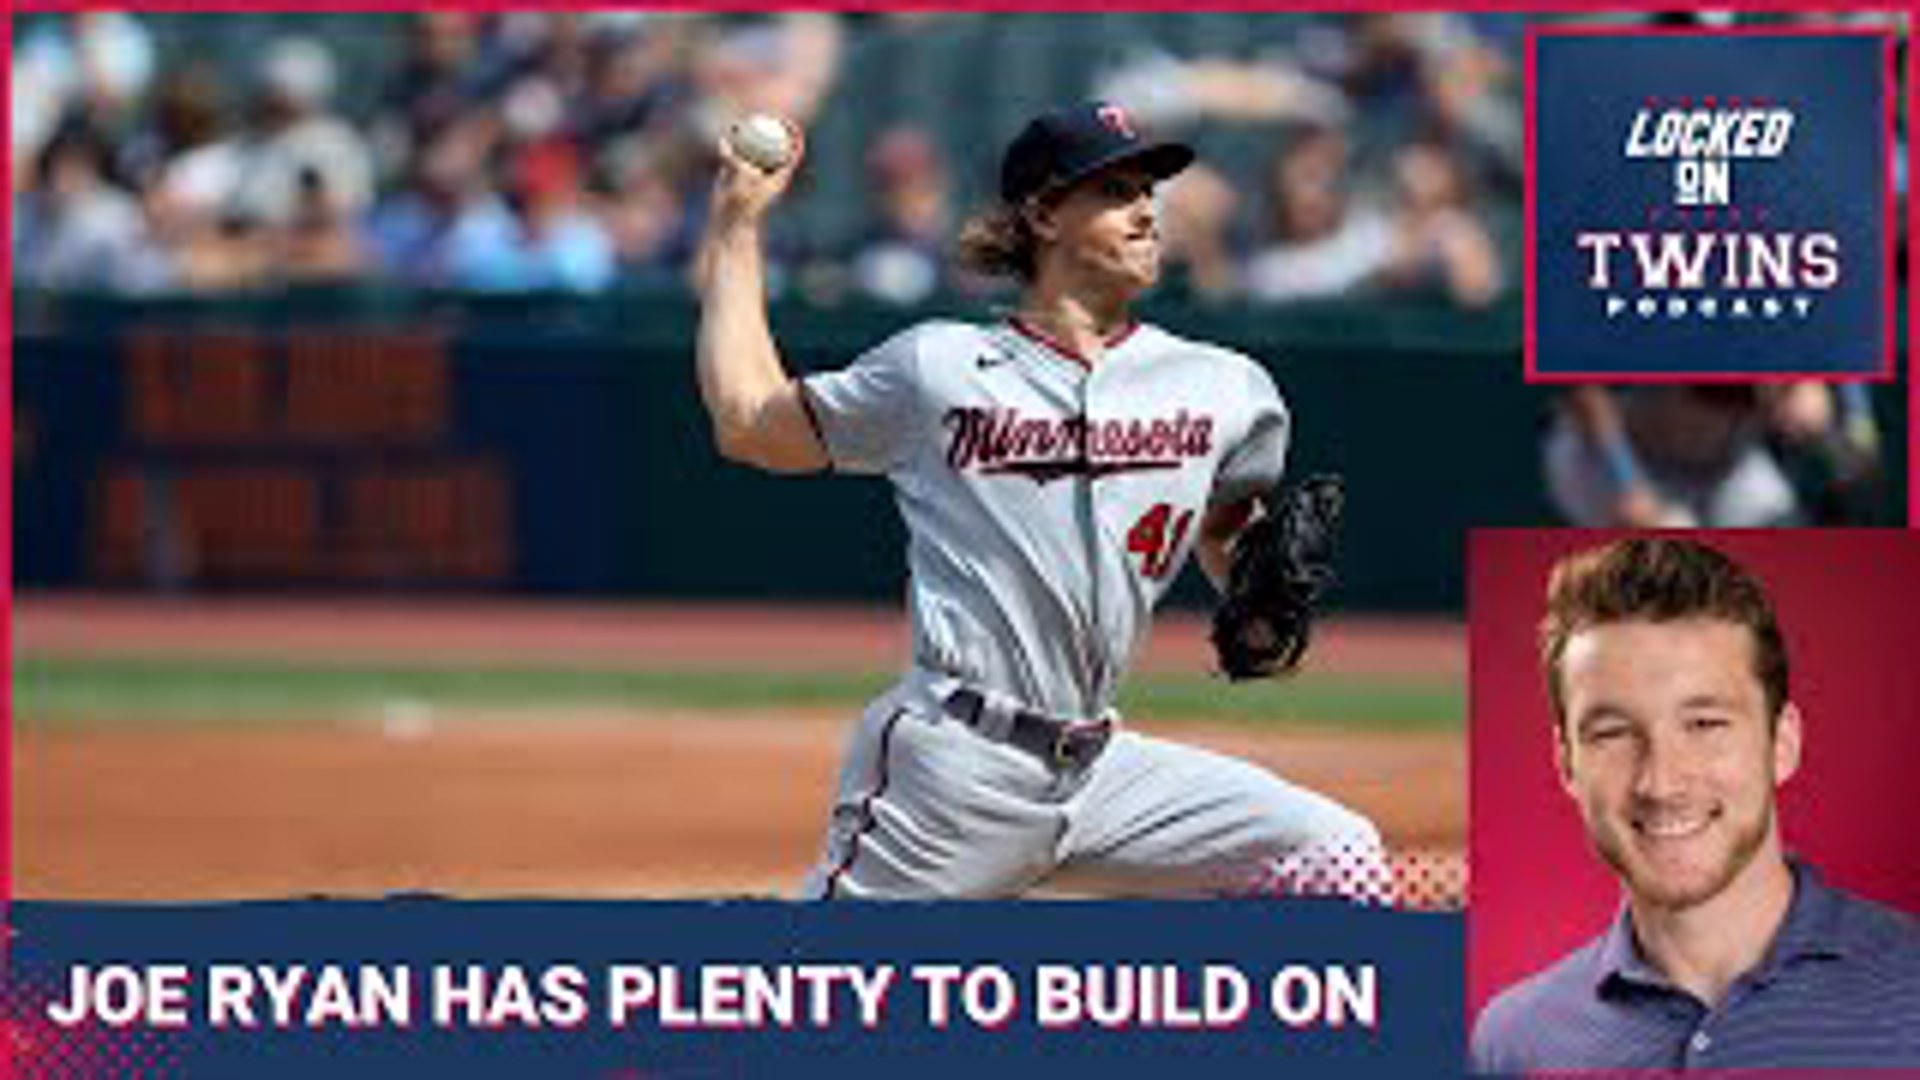 Joe Ryan threw 147 innings in a very solid rookie season in 2022, establishing himself as a building block for the future. Ryan is only 26 years old.